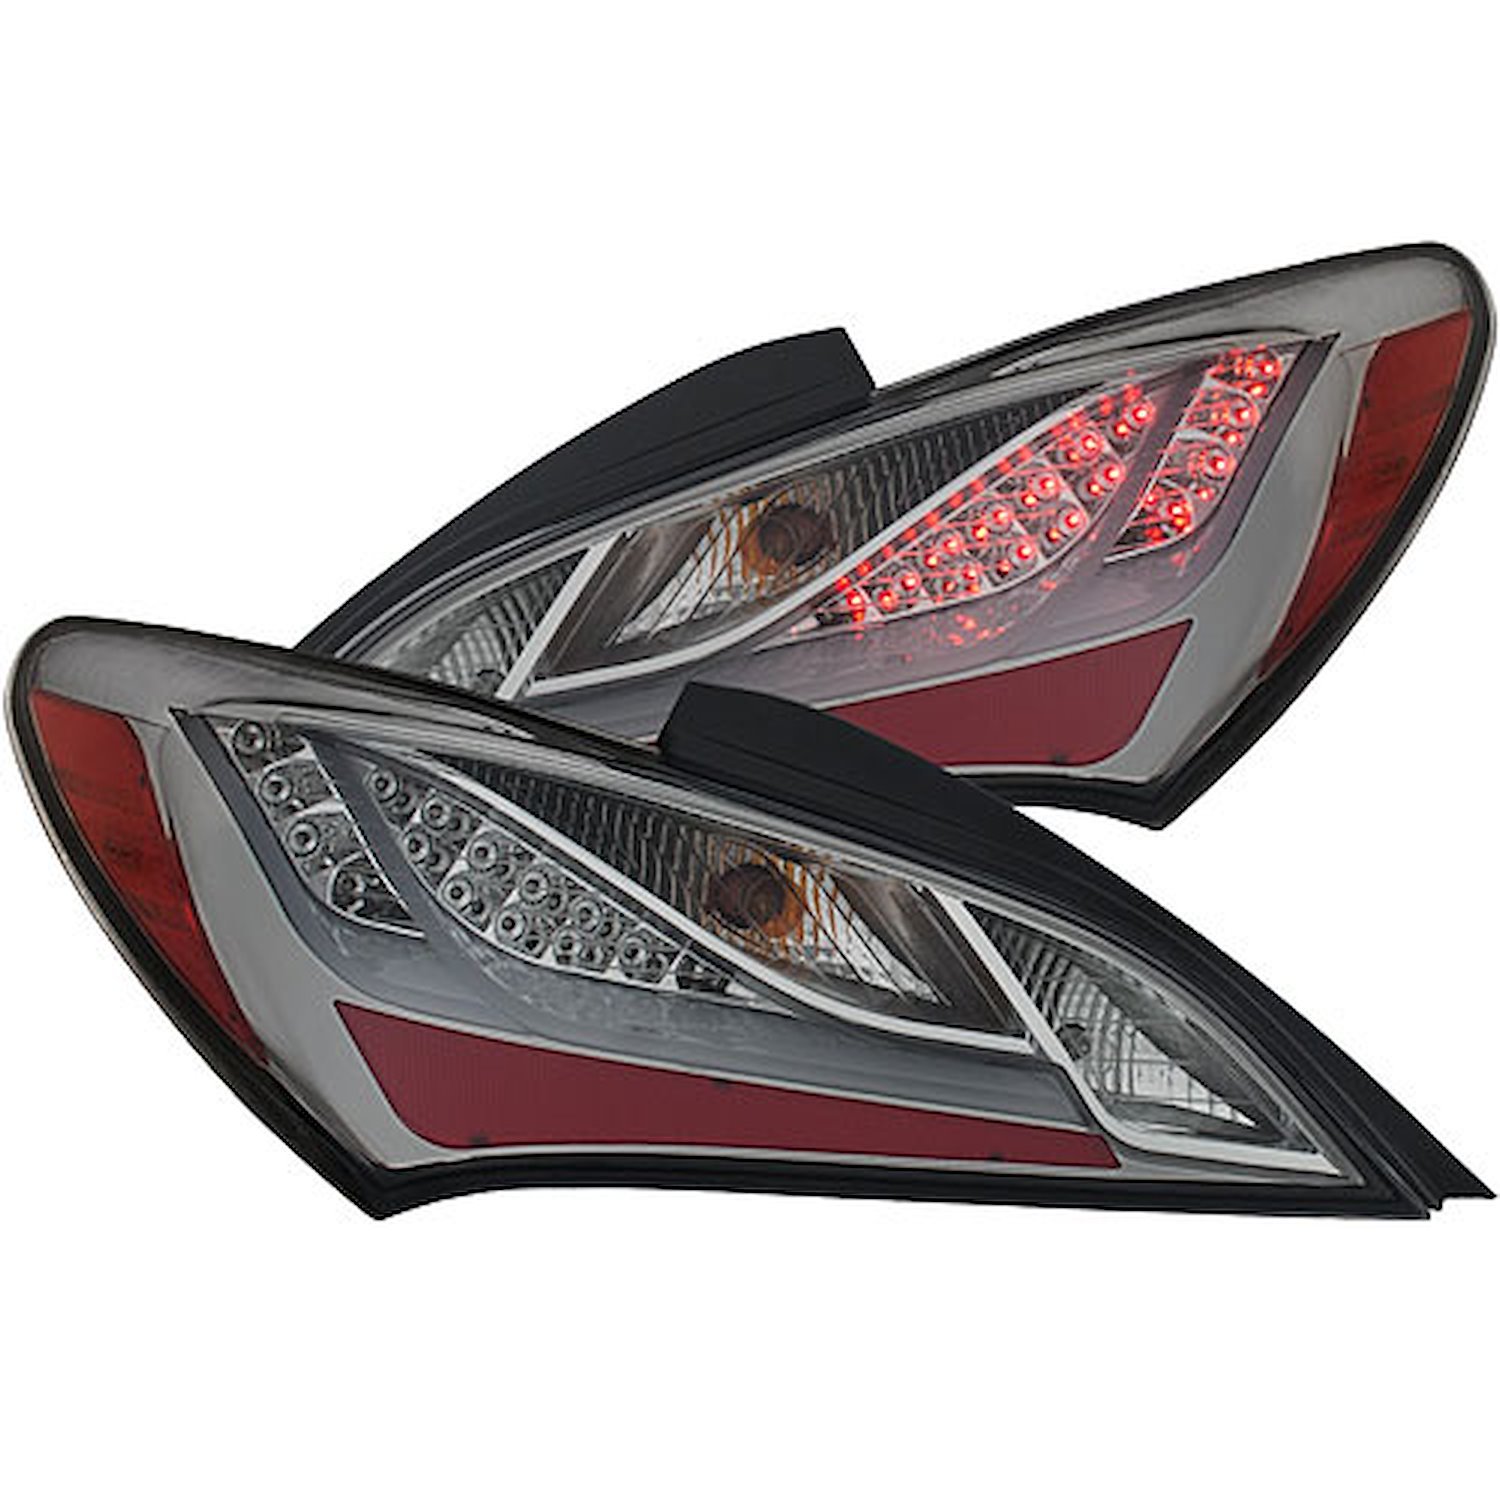 LED Taillights for 2010-2013 Hyundai Genesis Coupe